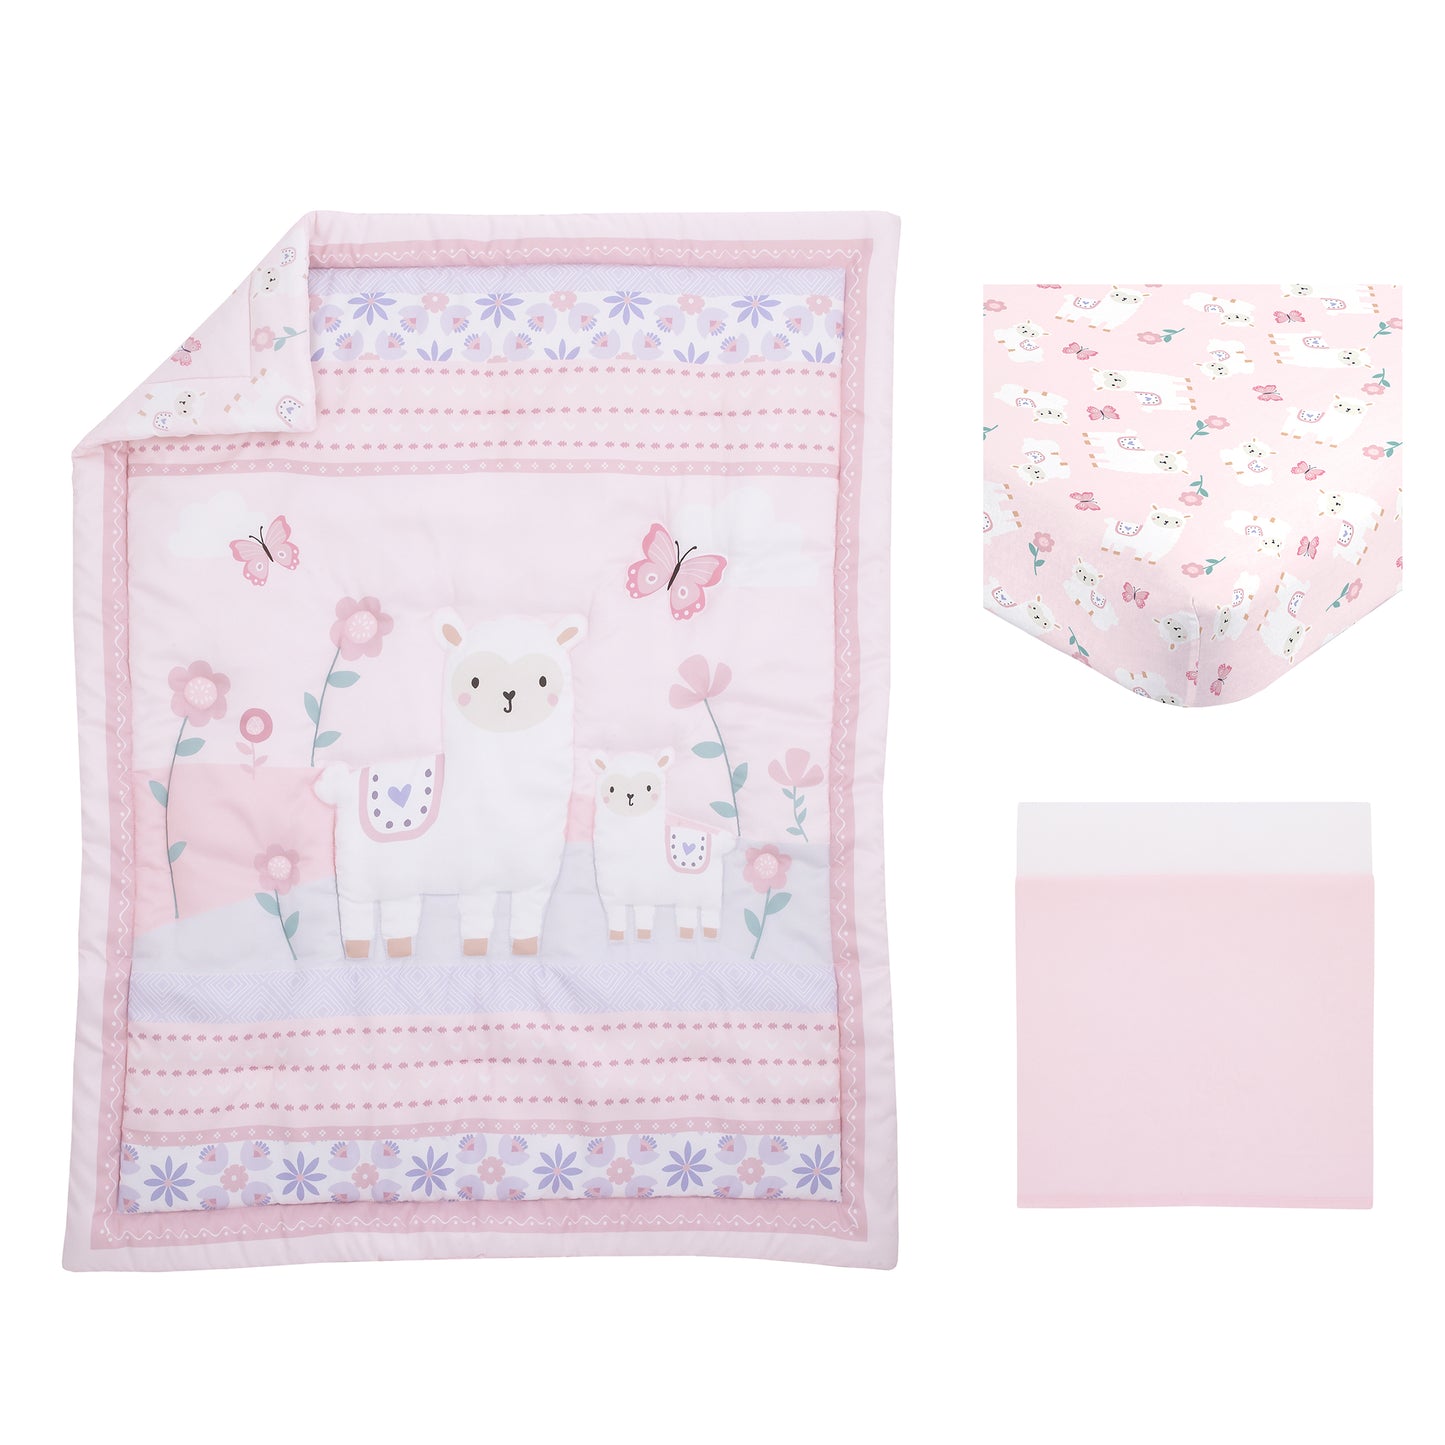 Little Love by NoJo Sweet Llama and Butterflies Floral Pink and Purple 3 Piece Crib Bedding Set - Comforter, Crib Sheet and Dust Ruffle